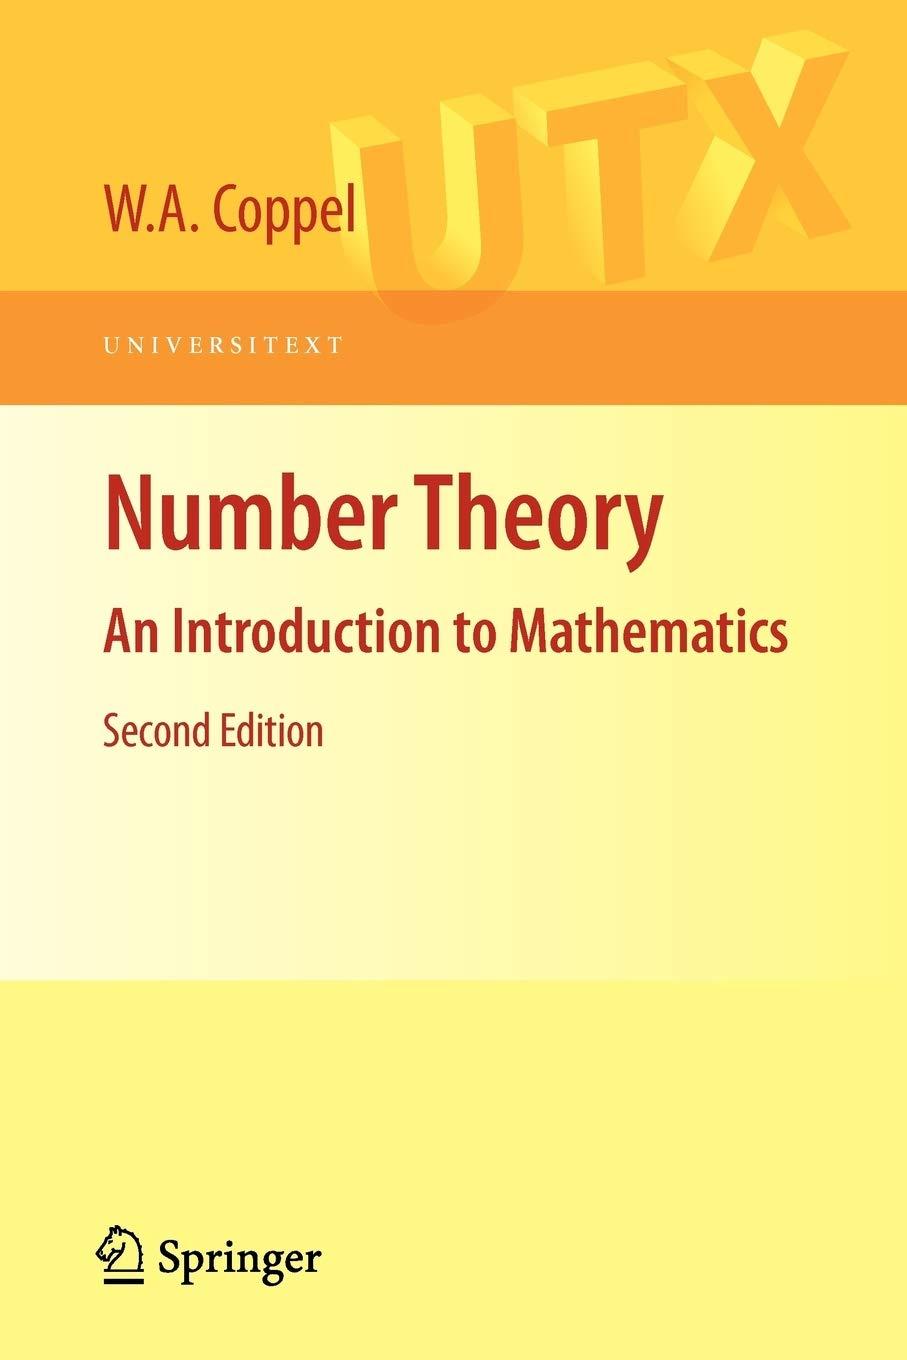 number theory an introduction to mathematics 2nd edition w.a. coppel 0387894853, 9780387894850